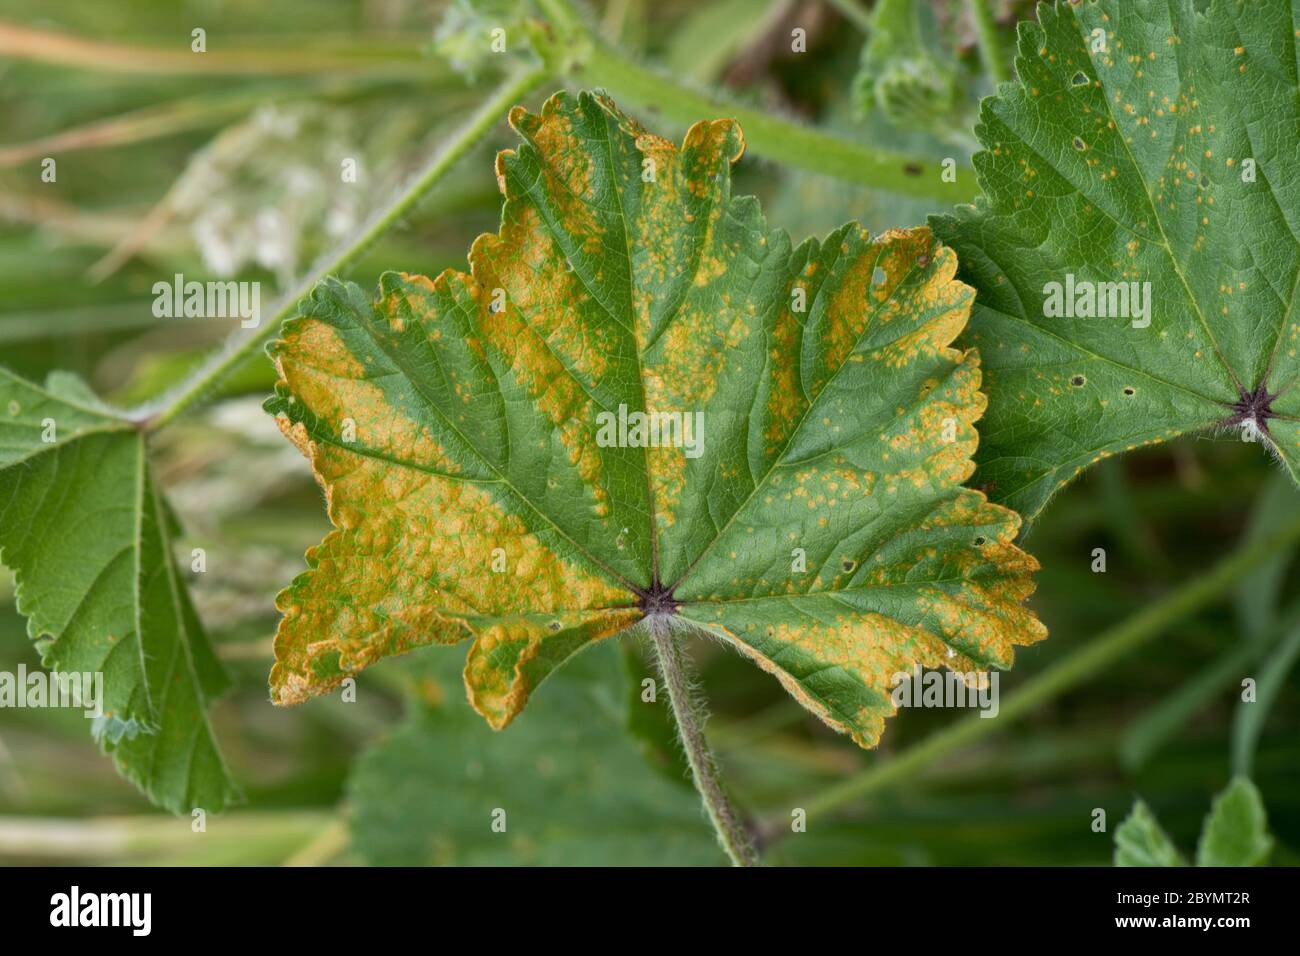 Mallow rust (Puccinia malvacearum) necrotic lesions on the upper surface of a common mallow (Malva neglecta) leaf, Berkshire, June Stock Photo